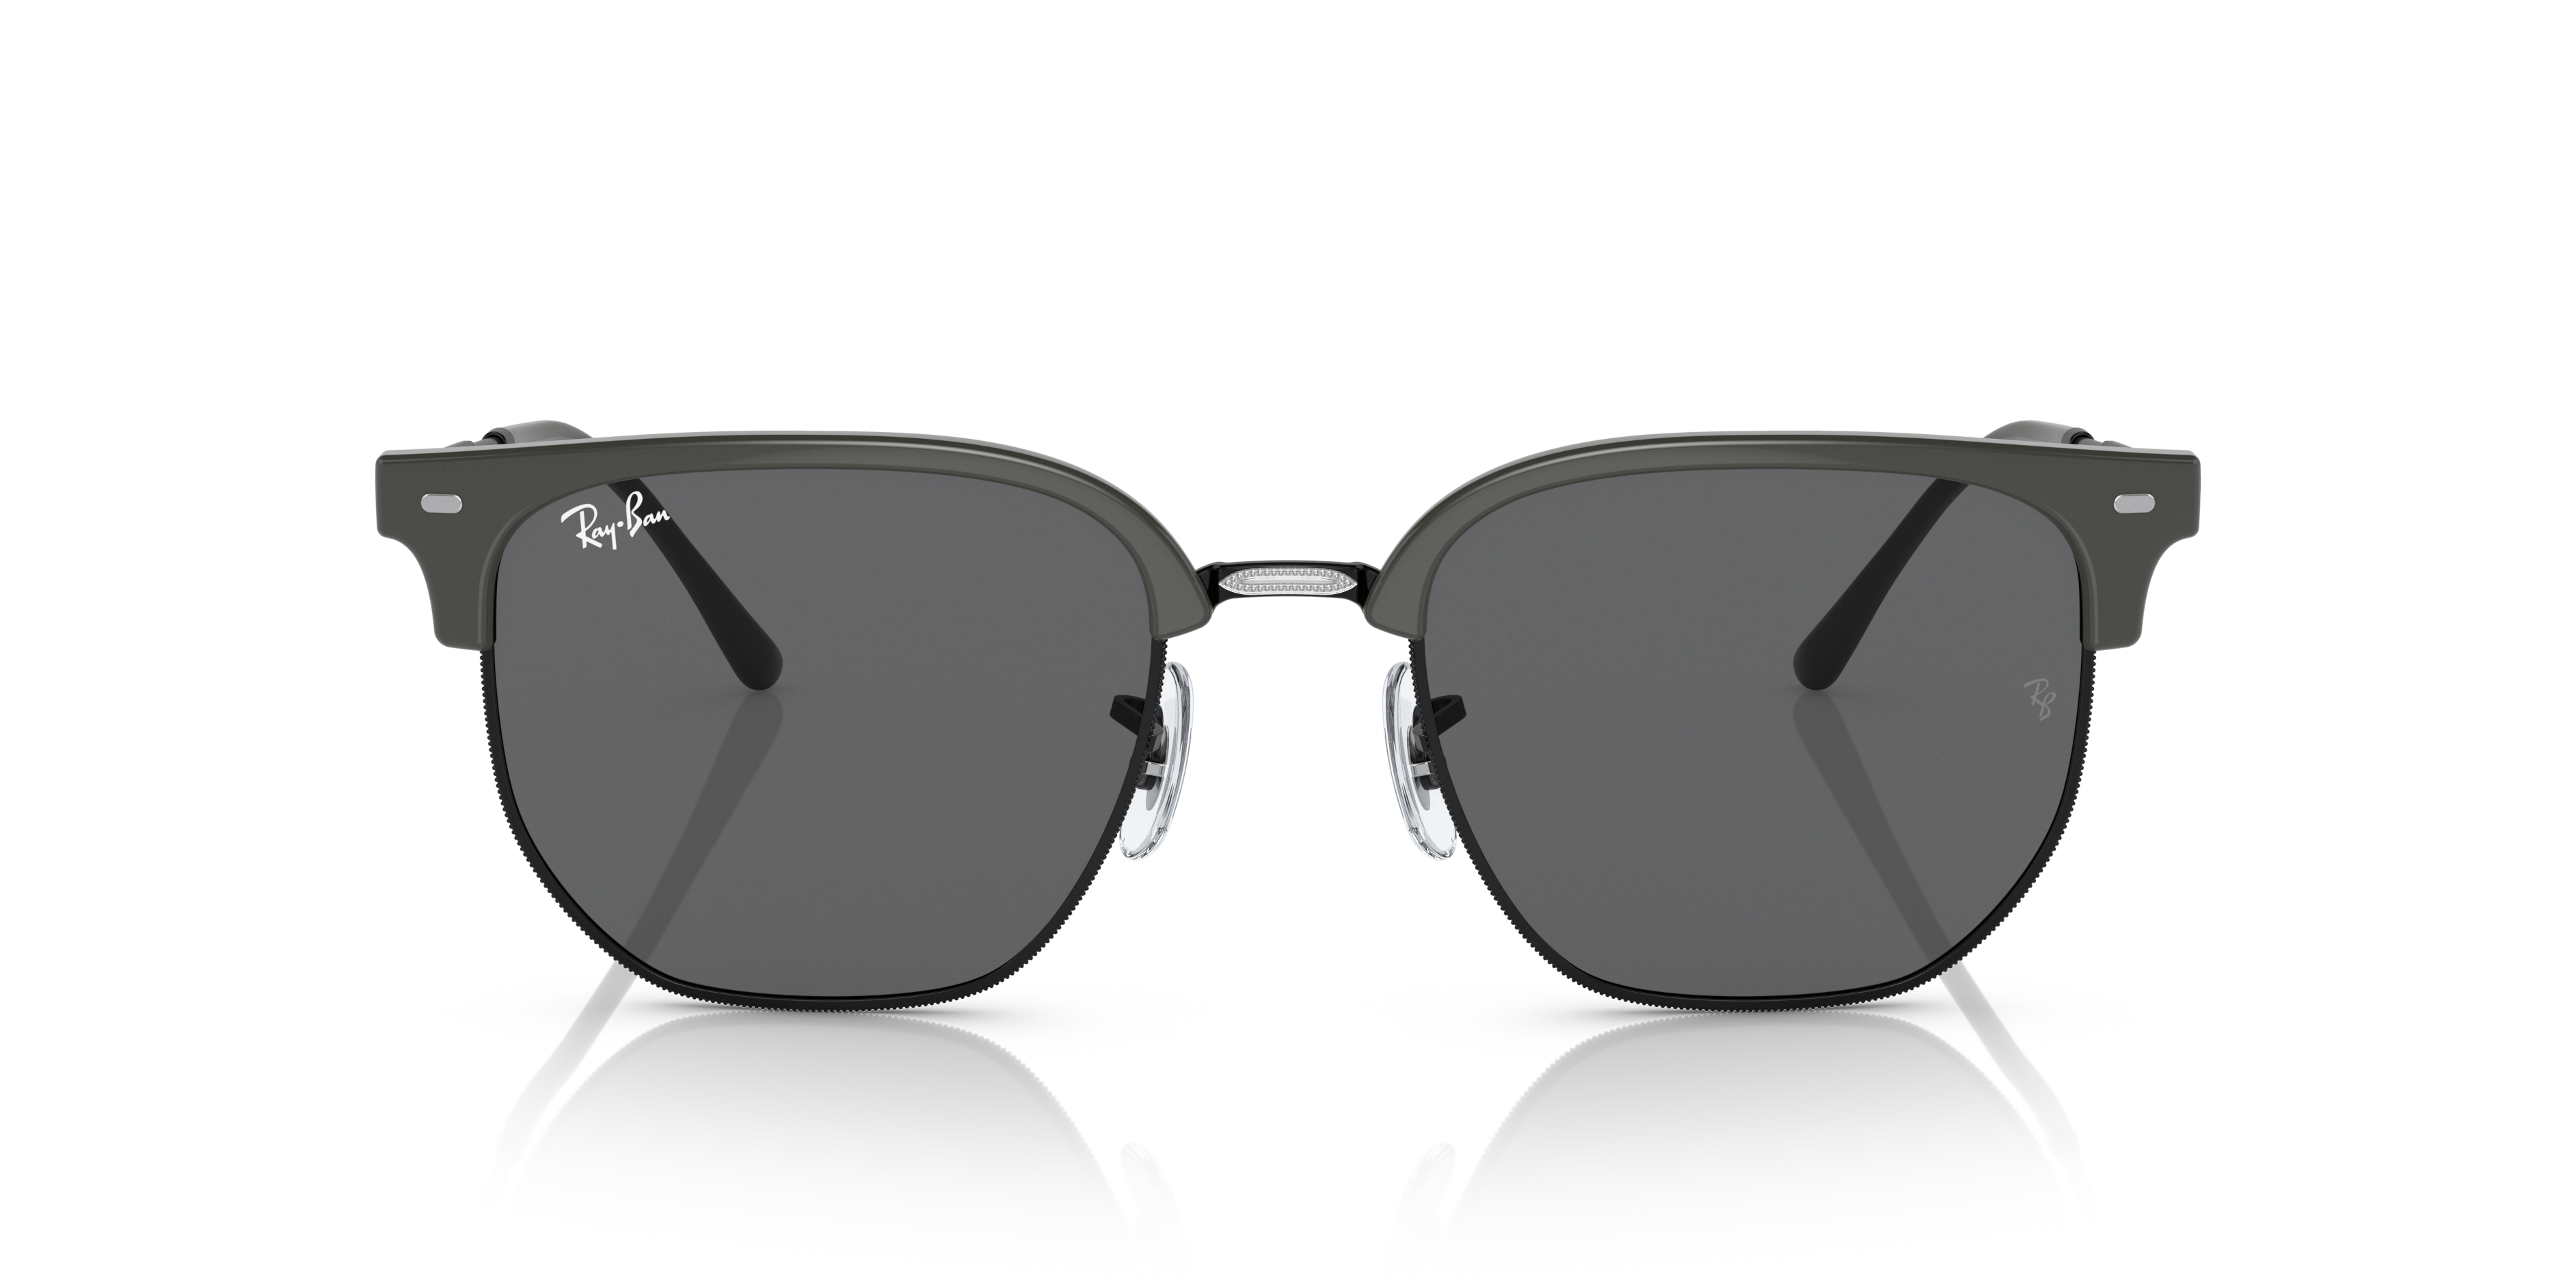 Sunglass Hut Discounts and Cash Back for Military, Nurses, & More | ID.me  Shop